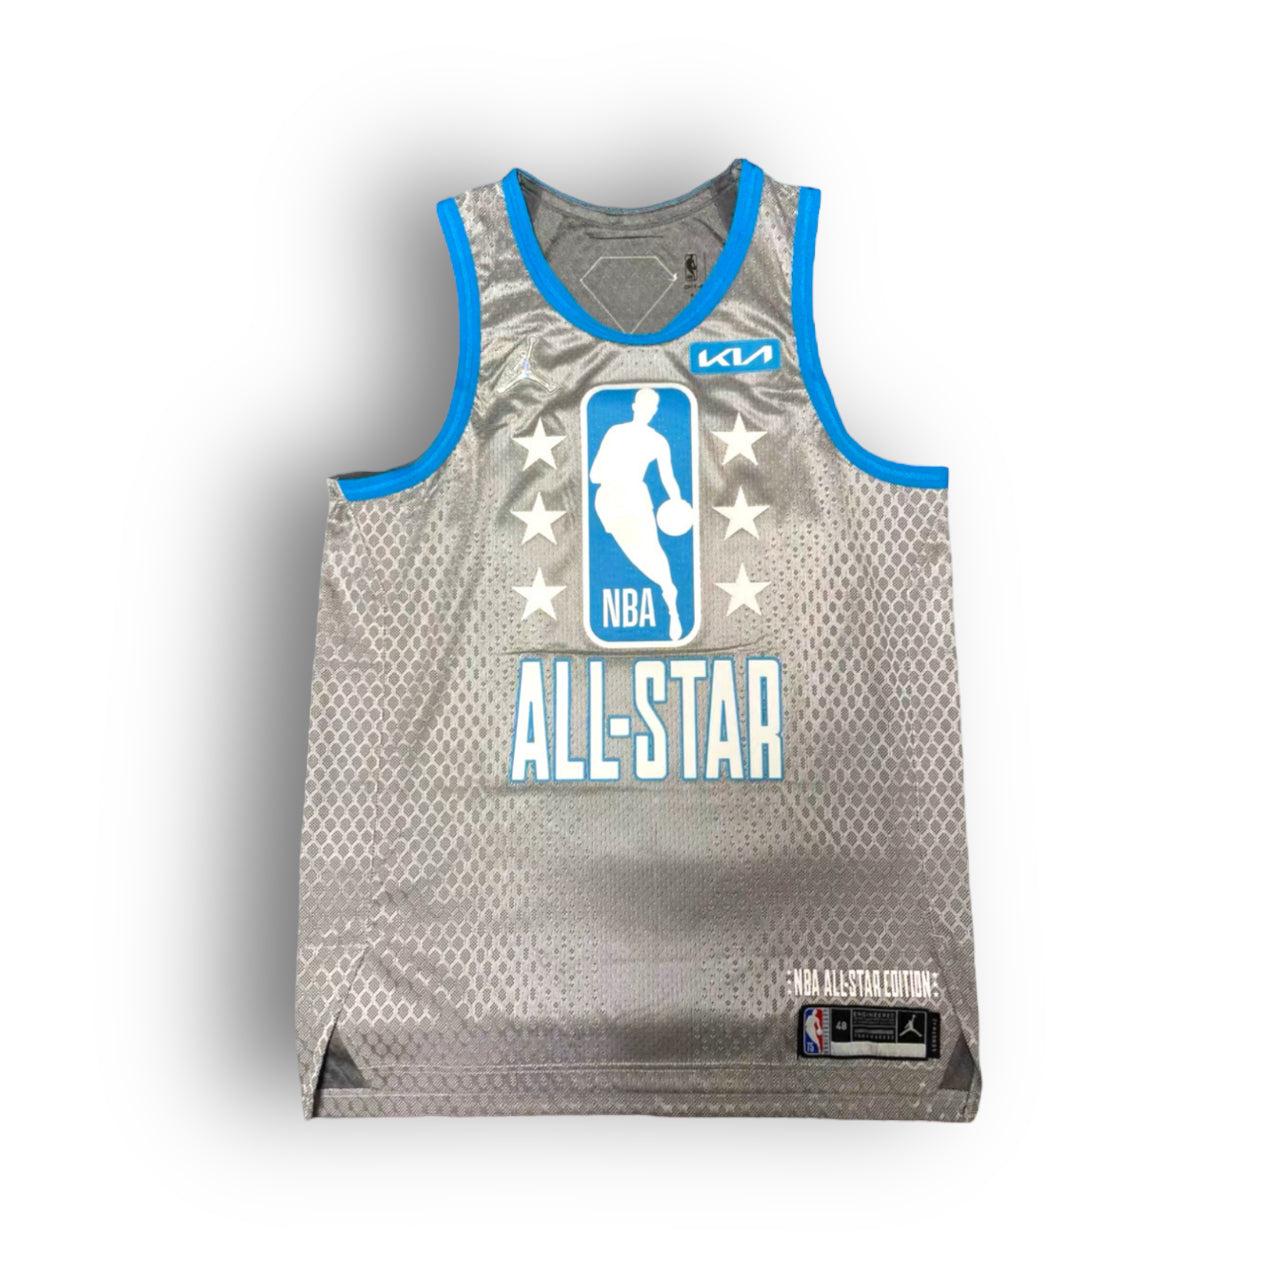 LeBron James 2021-2022 NBA All-Star Game Team LeBron Nike Authentic Jersey - Silver/Blue - Hoop Jersey Store